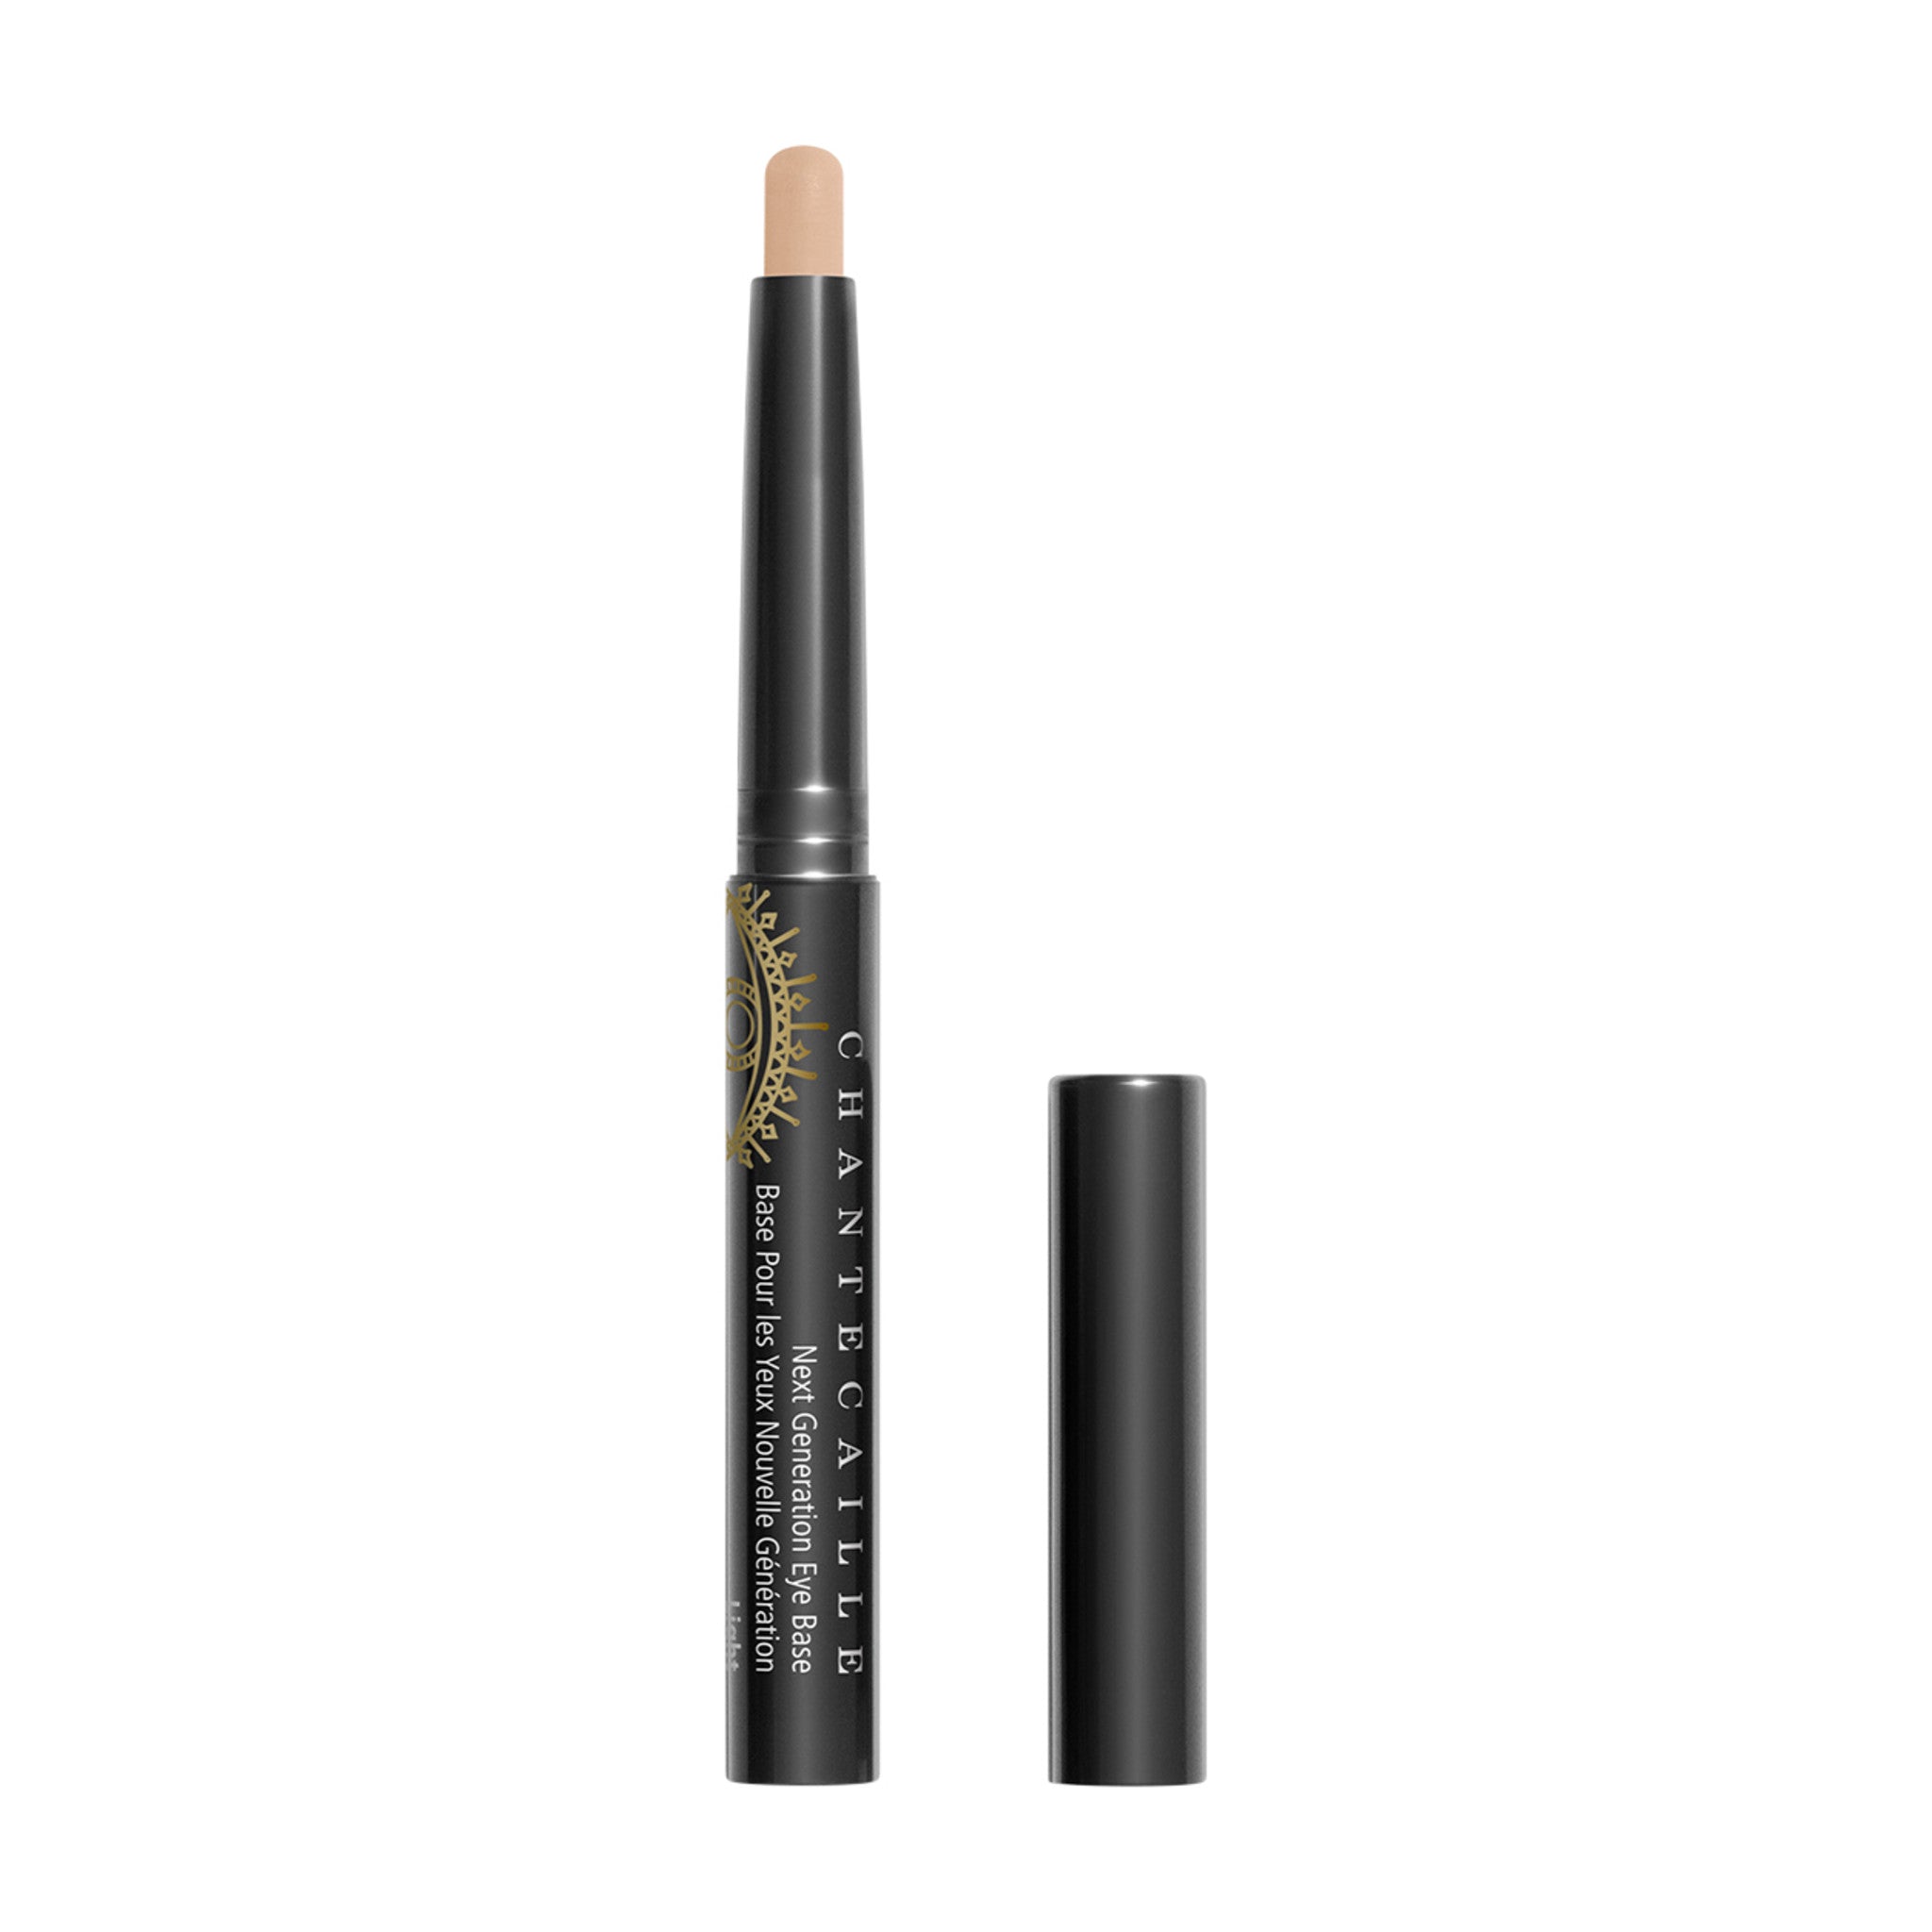 Chantecaille Next Generation Eye Base Color/Shade variant: Light main image. This product is in the color nude